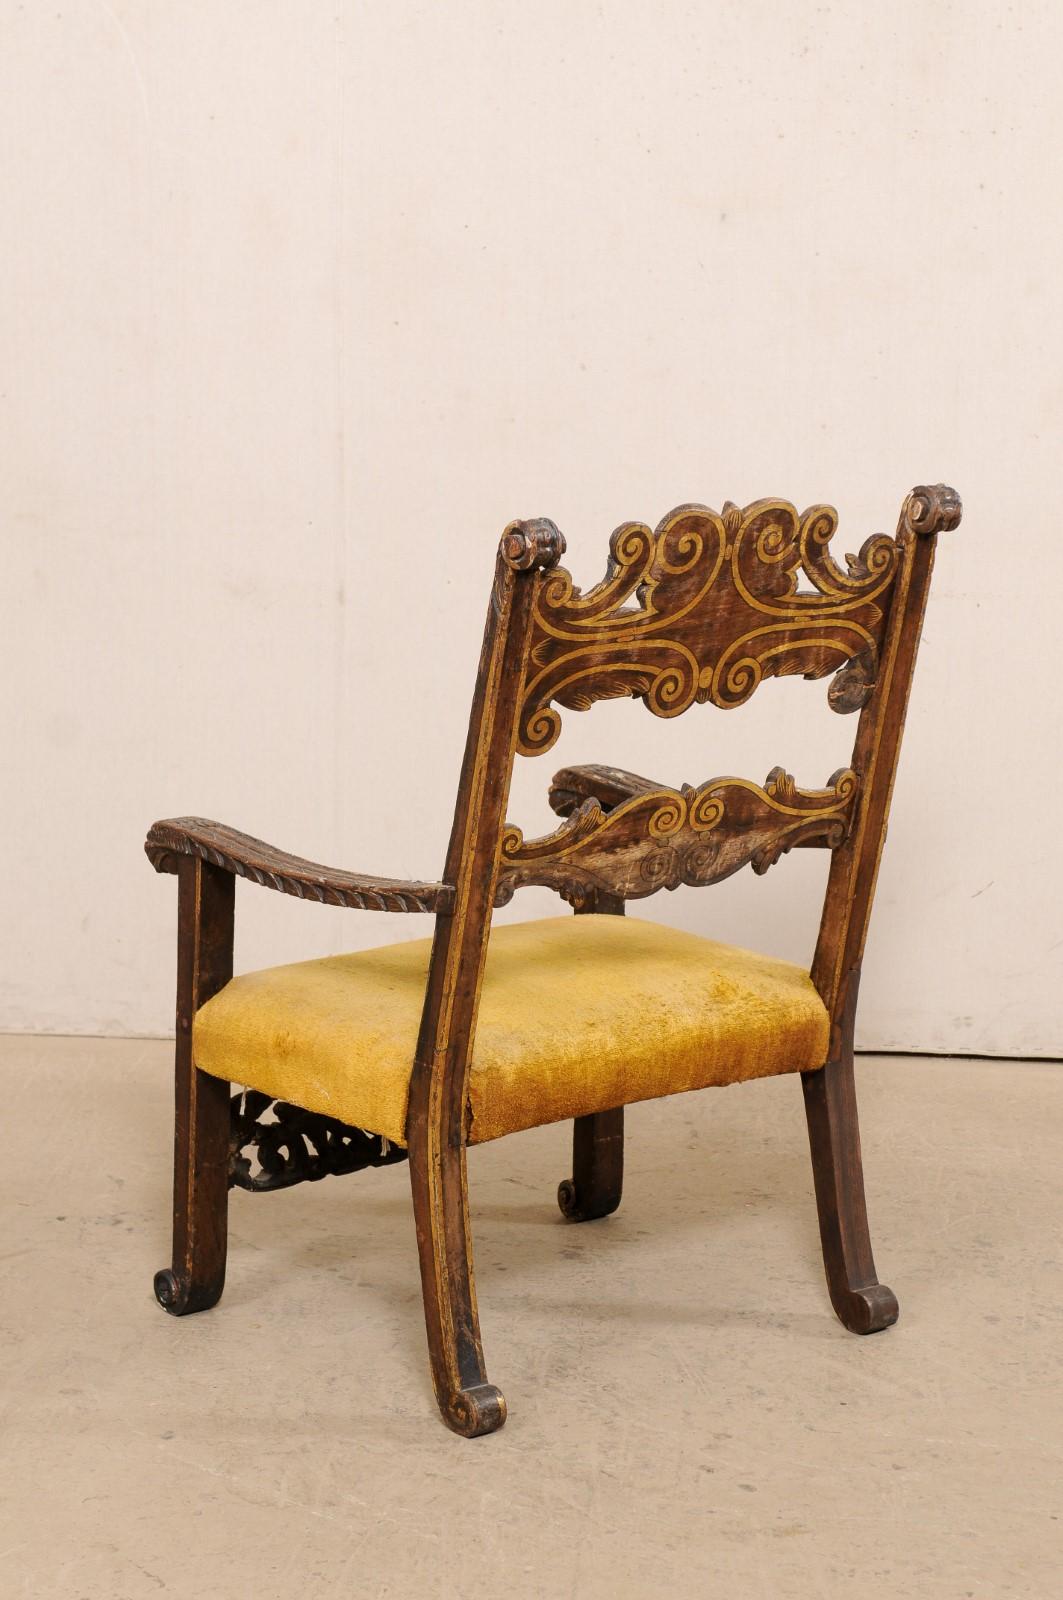 Handsome 18th C Italian Baroque Arm Chair with Intricately Carved Details For Sale 1